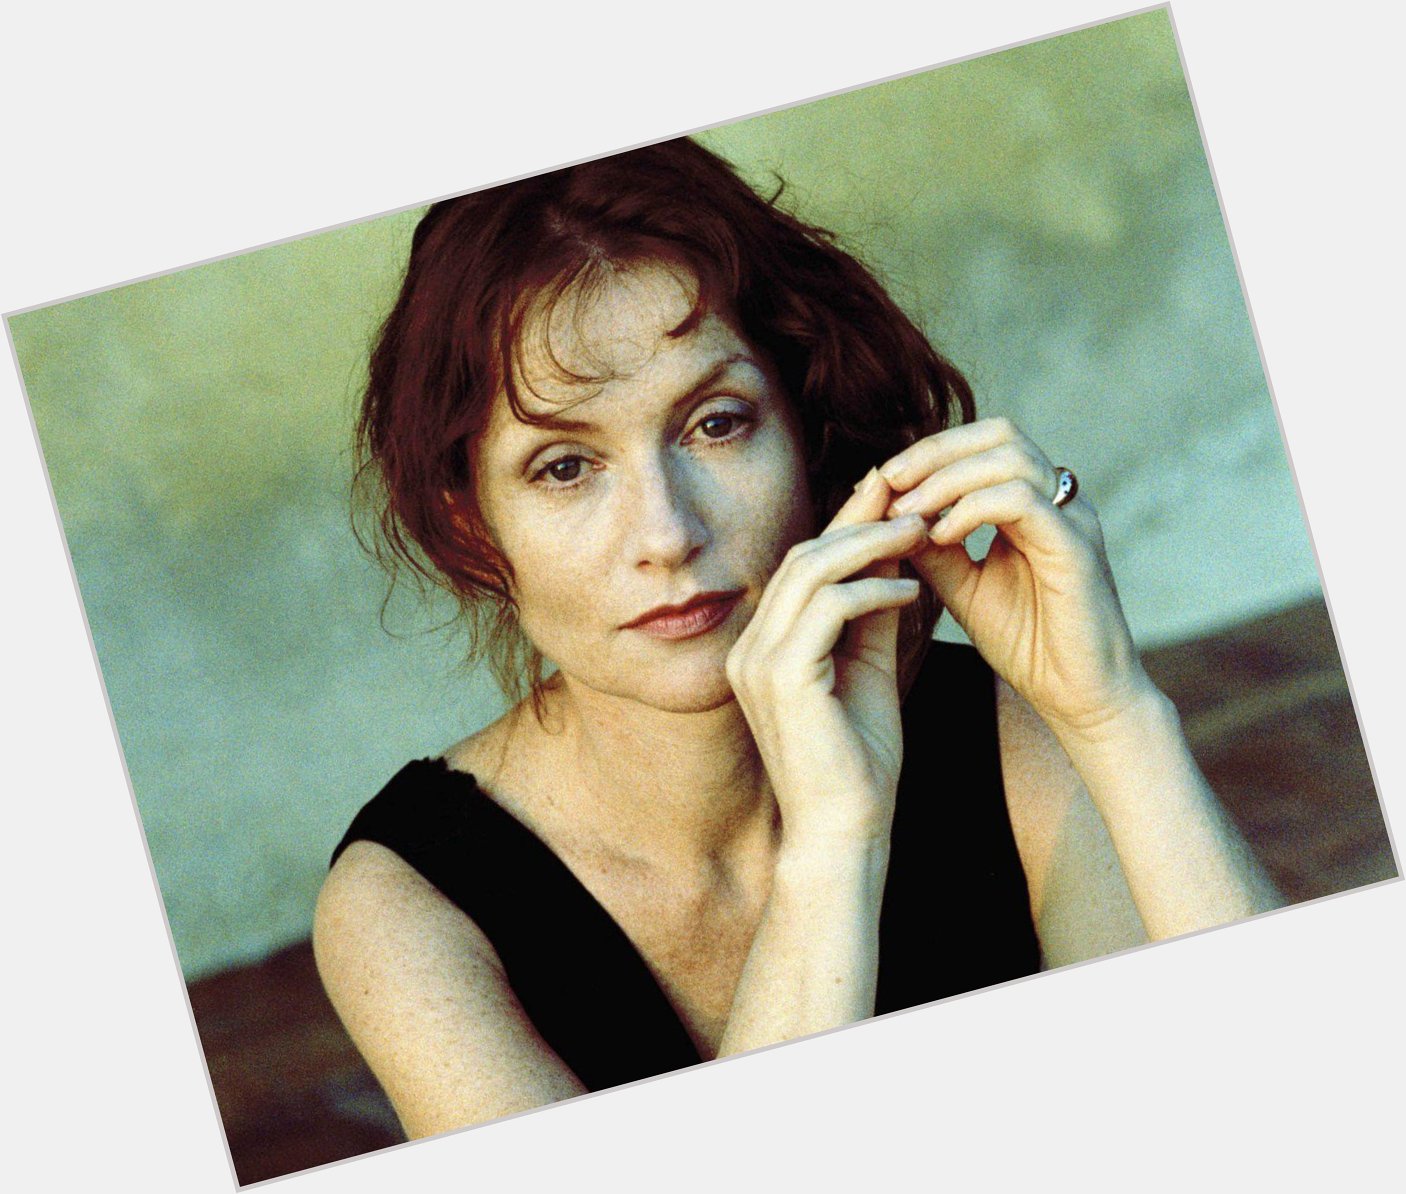 One of my doppelgänger\s (and a fave actress) birthday today.  Happy birthday, Isabelle Huppert! 